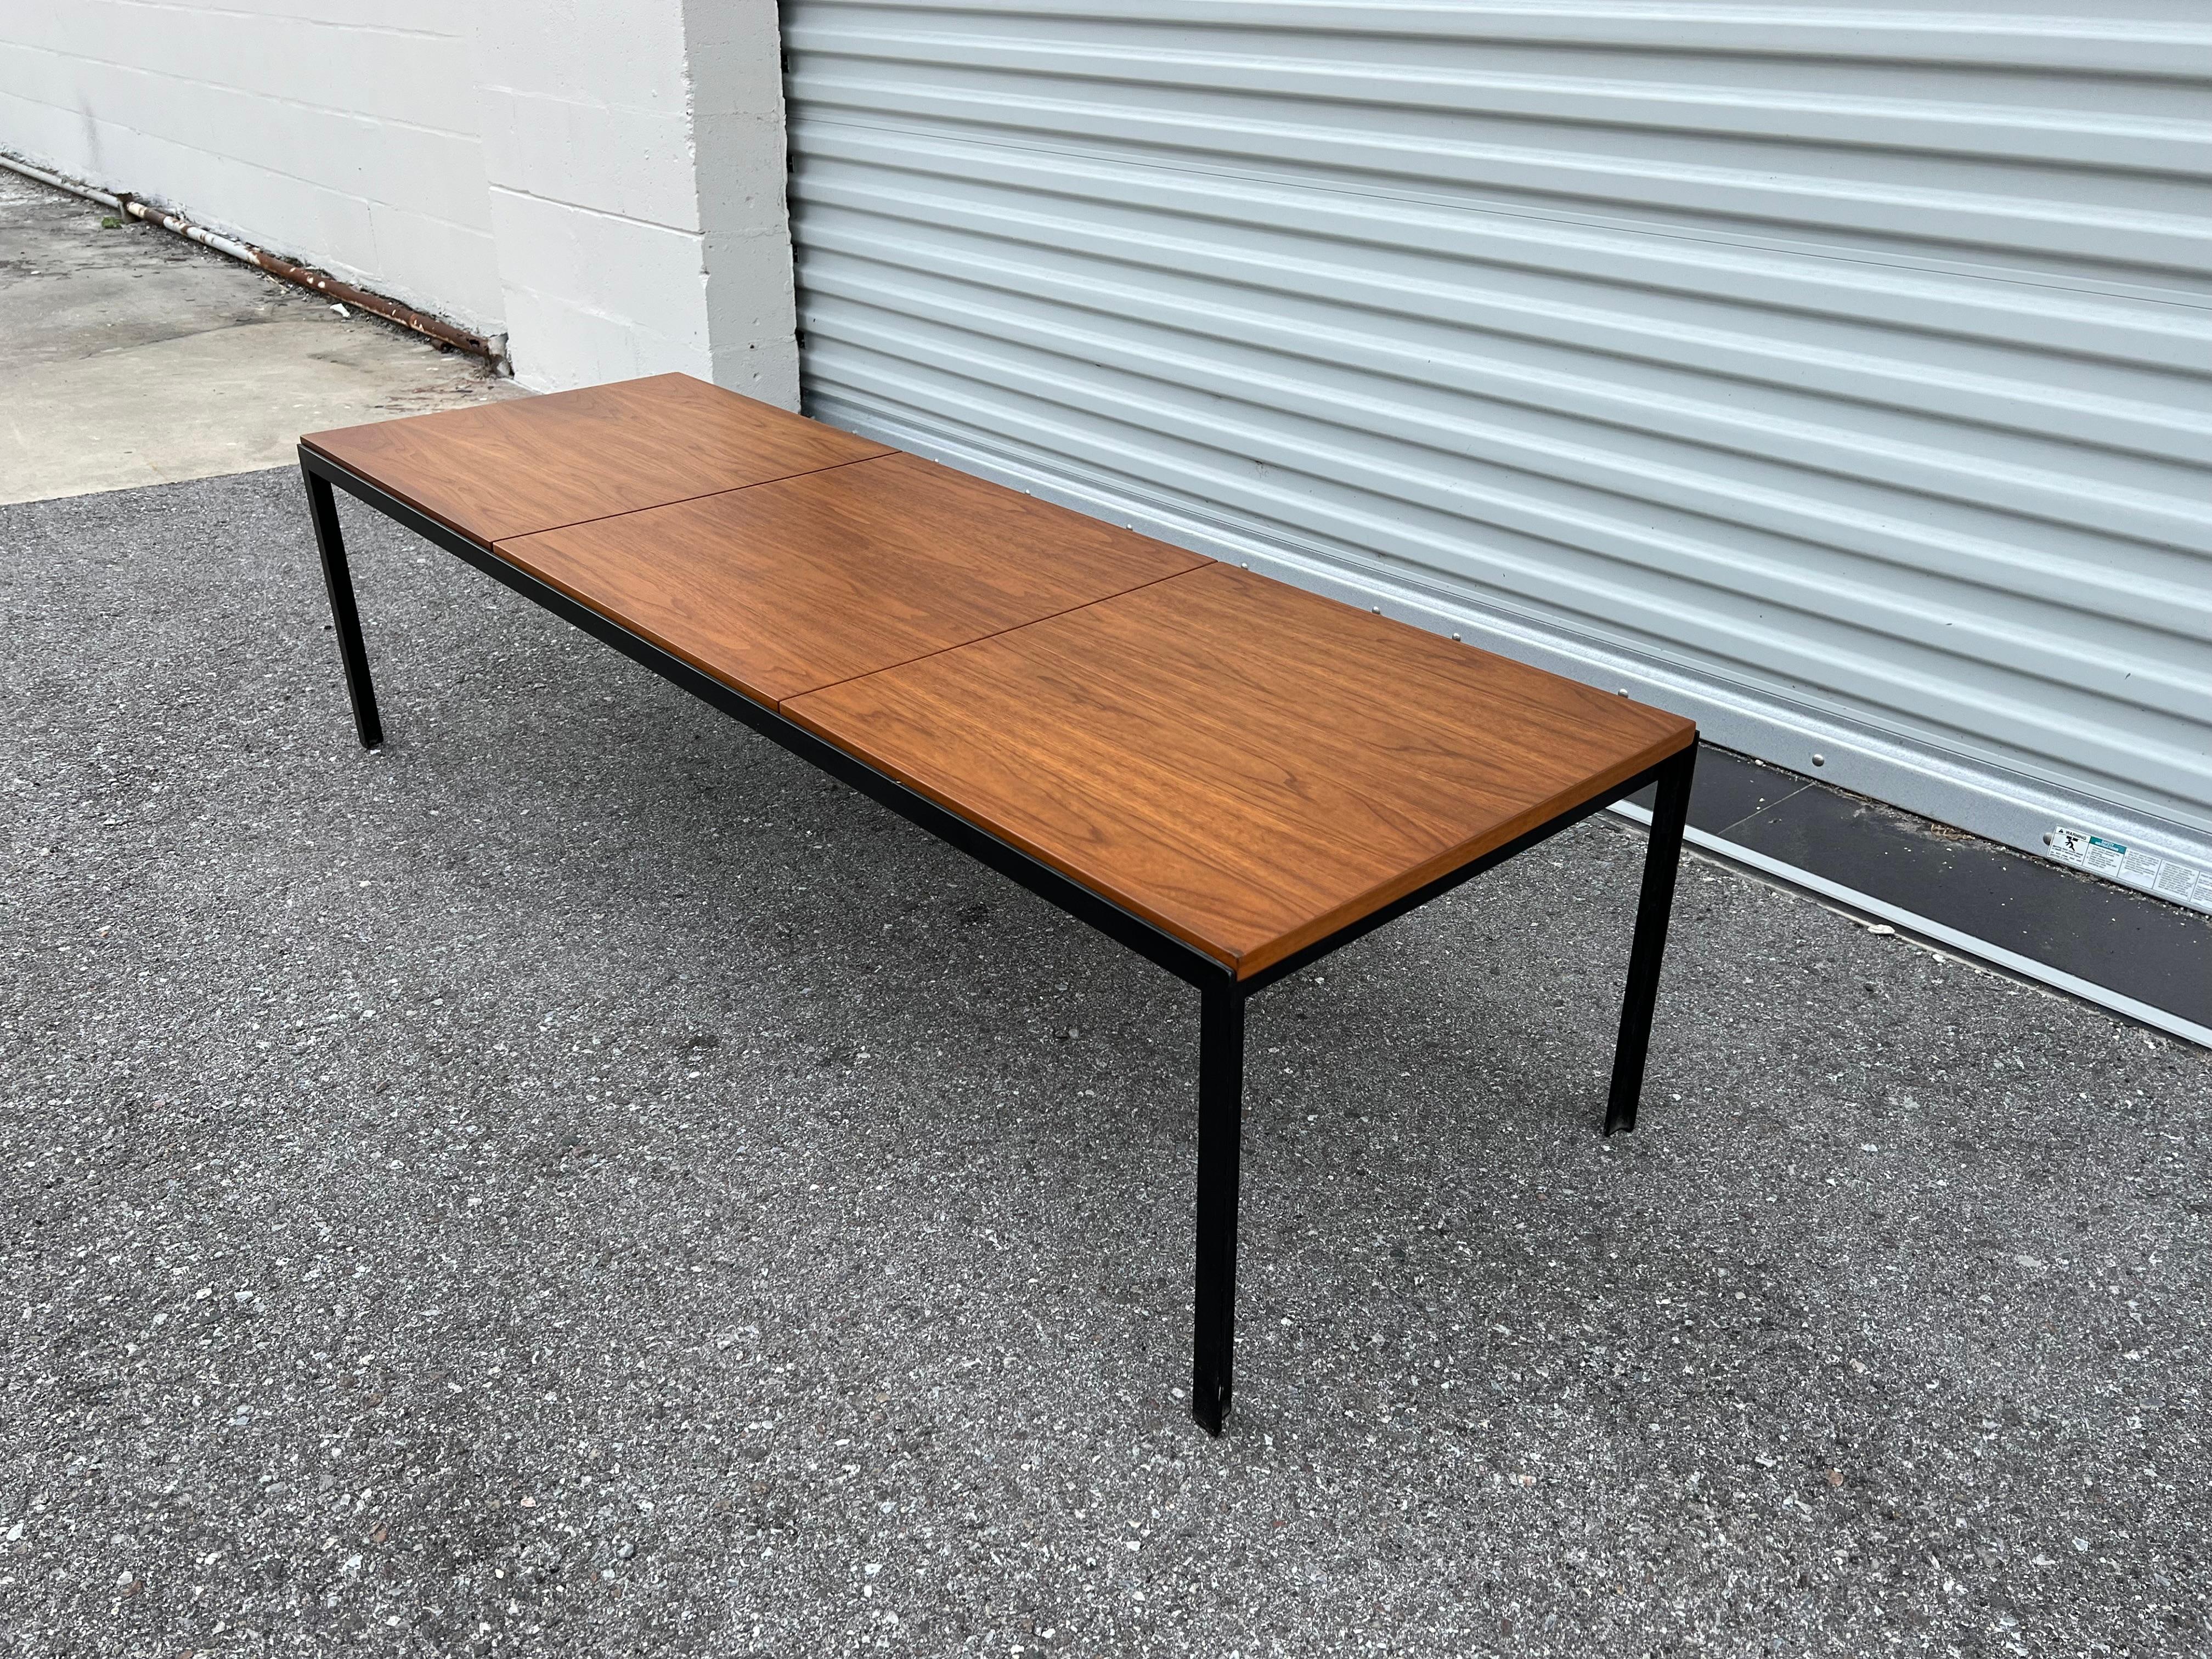 American A Classic Knoll Coffee Table Or Bench With Angle Iron Frame Ca' 1960's For Sale